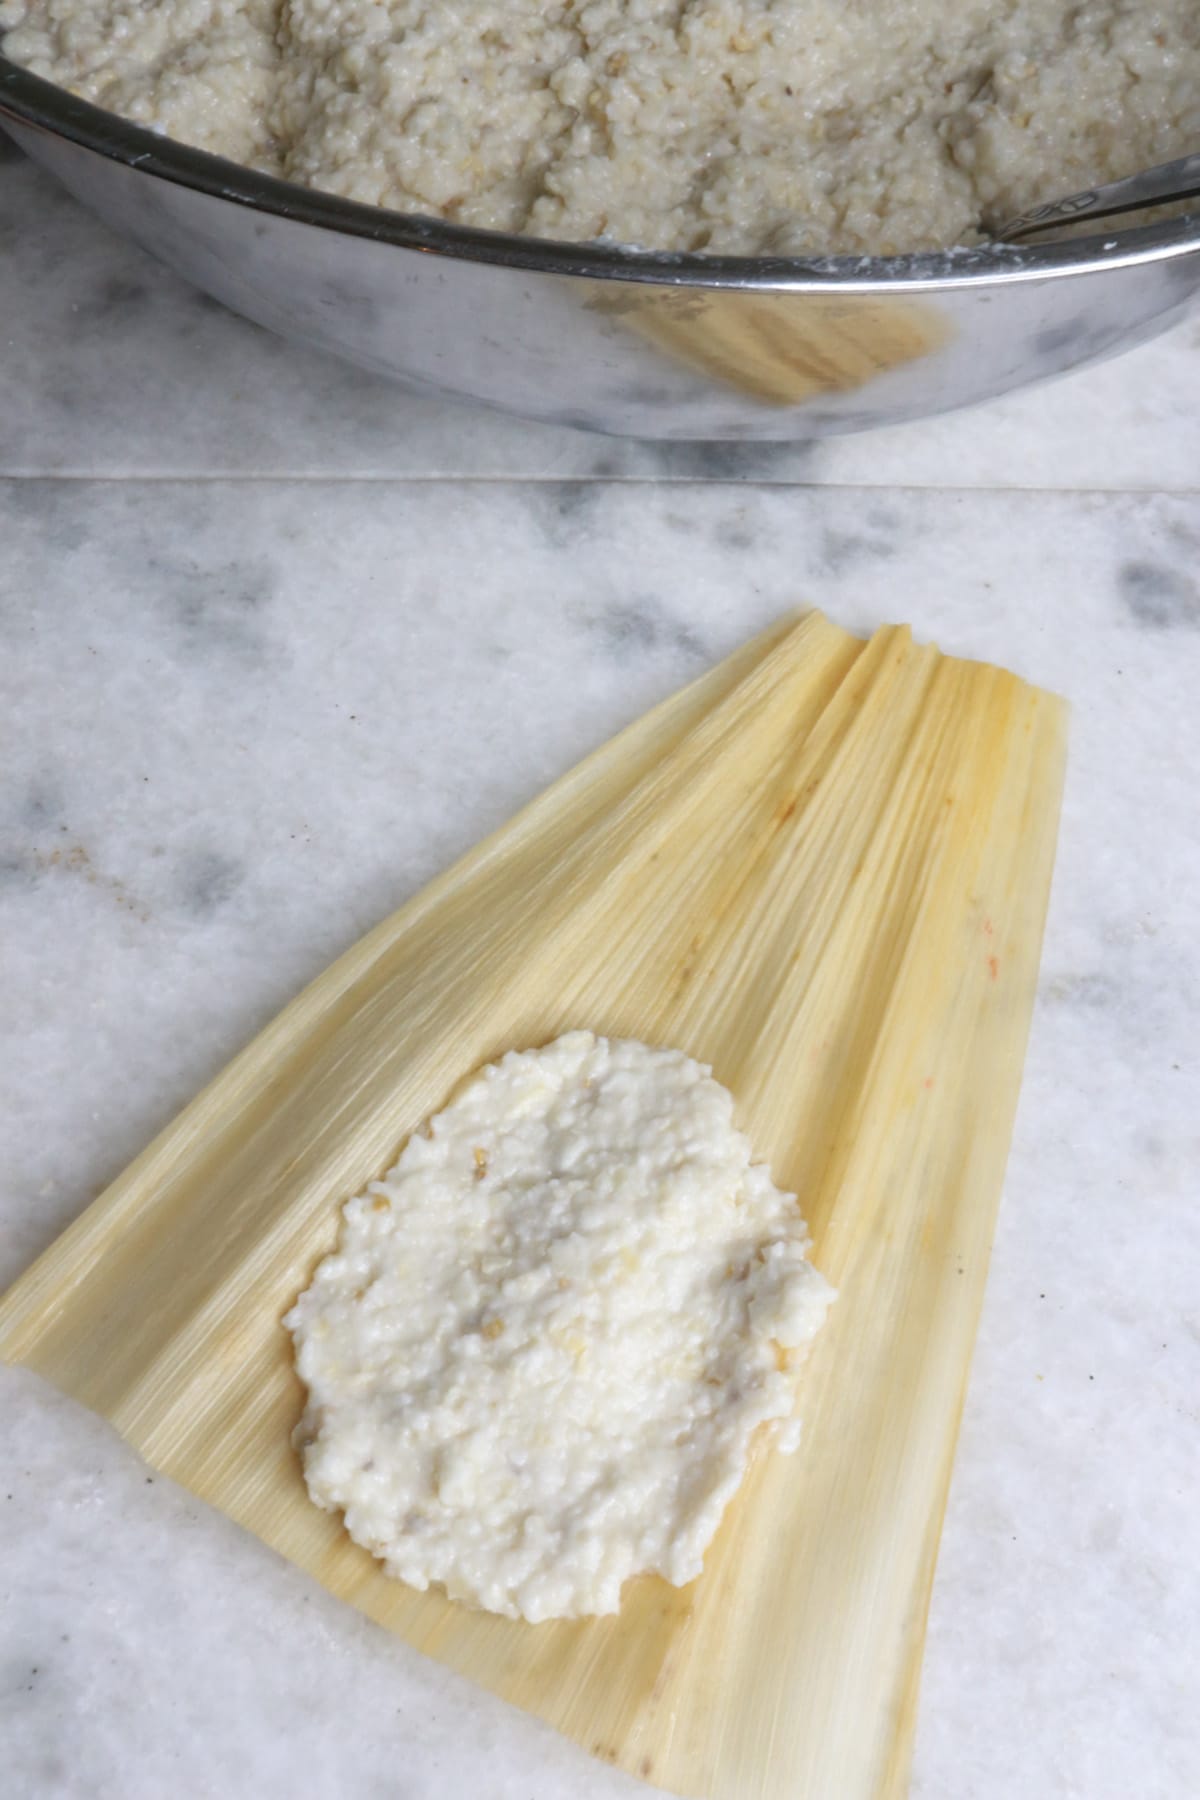 A corn husk with masa for tamales spread on it and a big bowl with masa